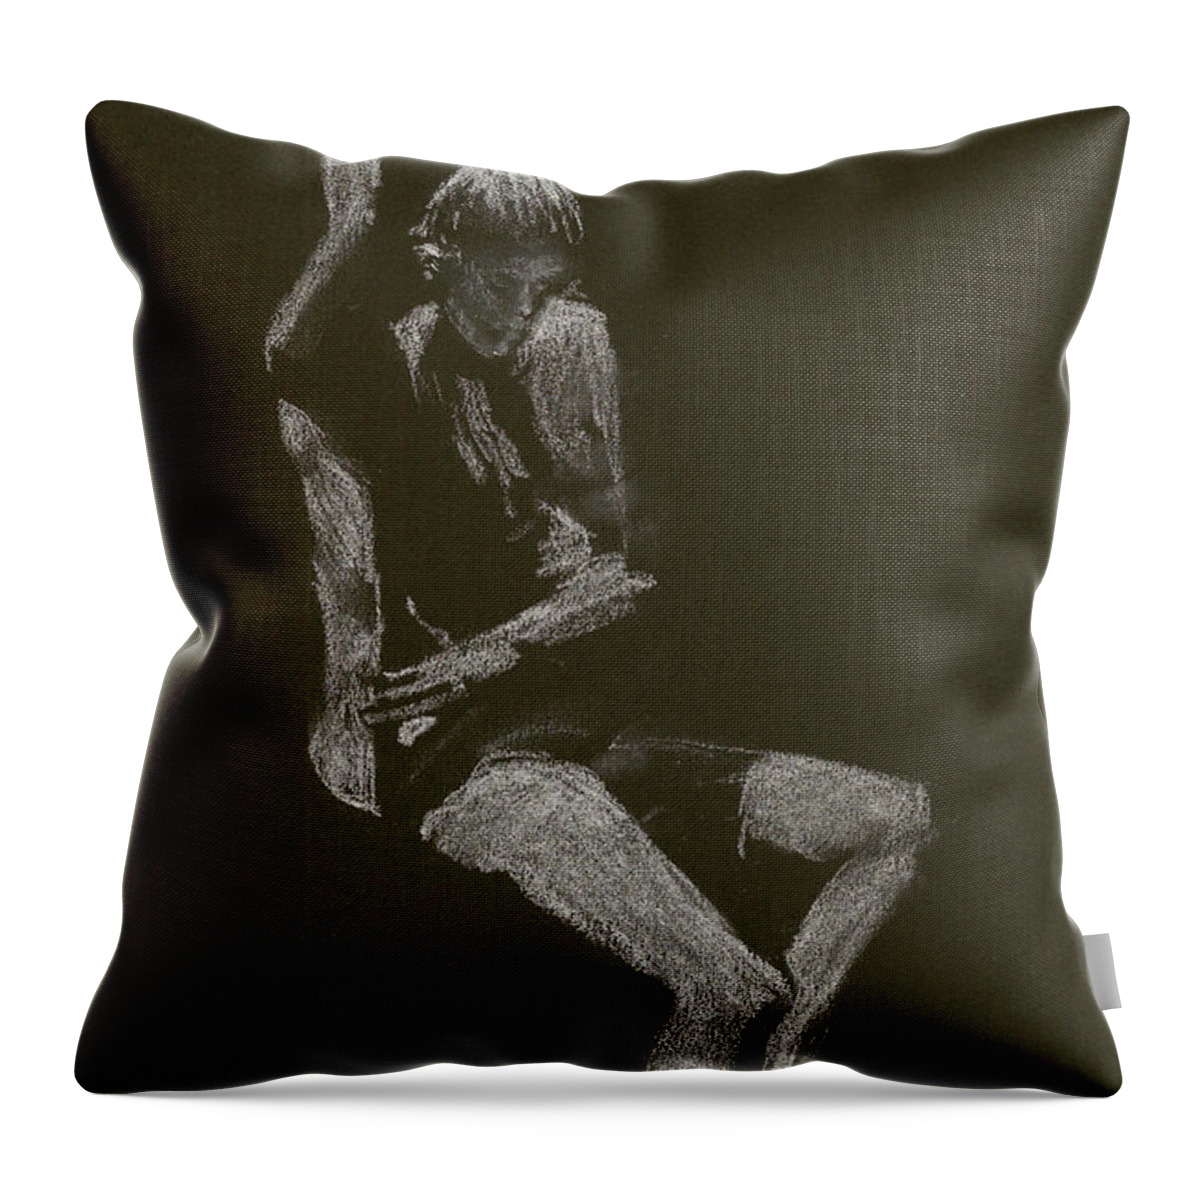 Modell Throw Pillow featuring the drawing Kroki 2014 10 04_12 Figure Drawing White Chalk by Marica Ohlsson